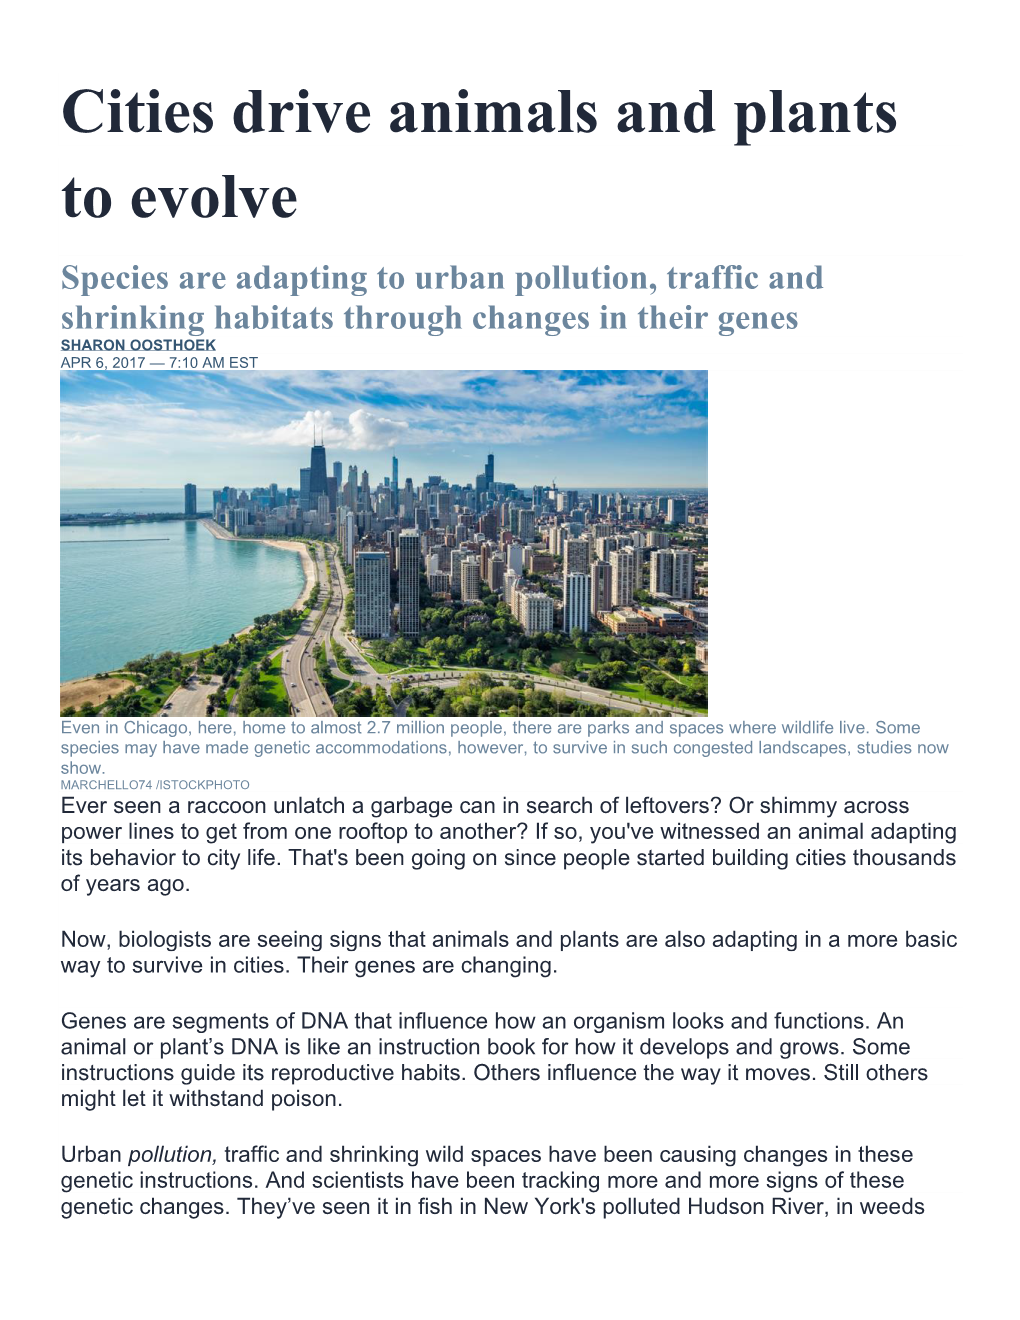 Cities Drive Animals and Plants to Evolve